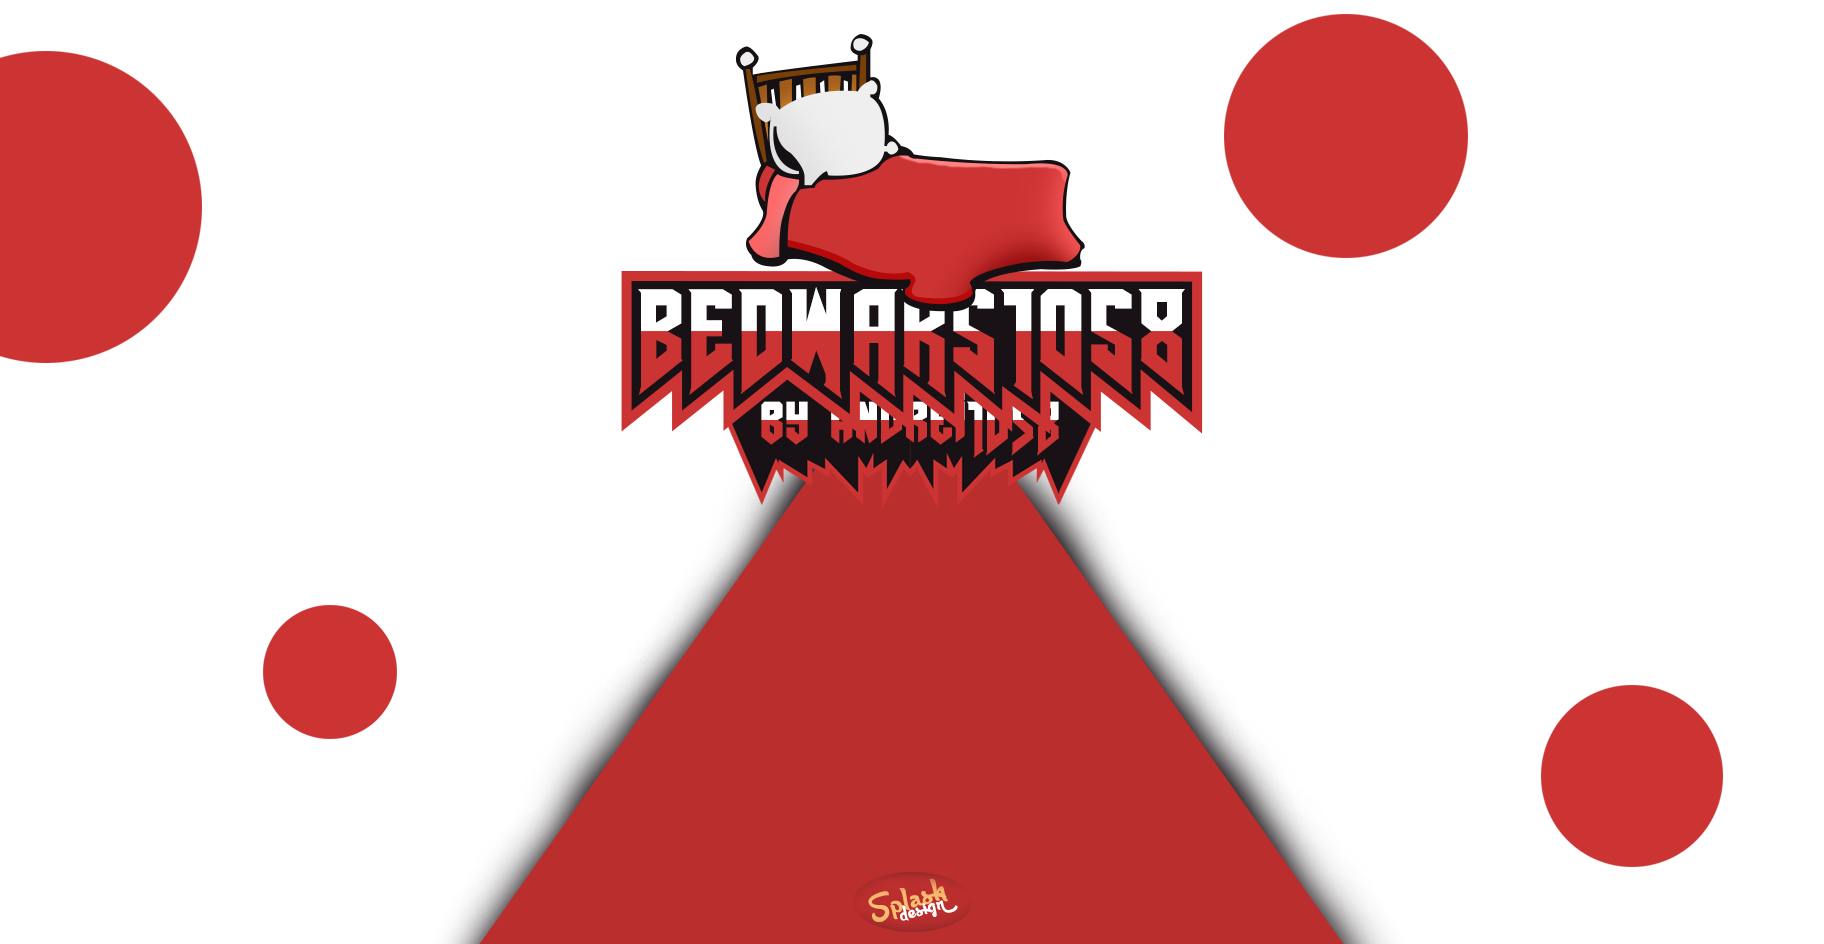 GitHub - PandhoStg/BedWars1058-MapCommand: You can see the name of